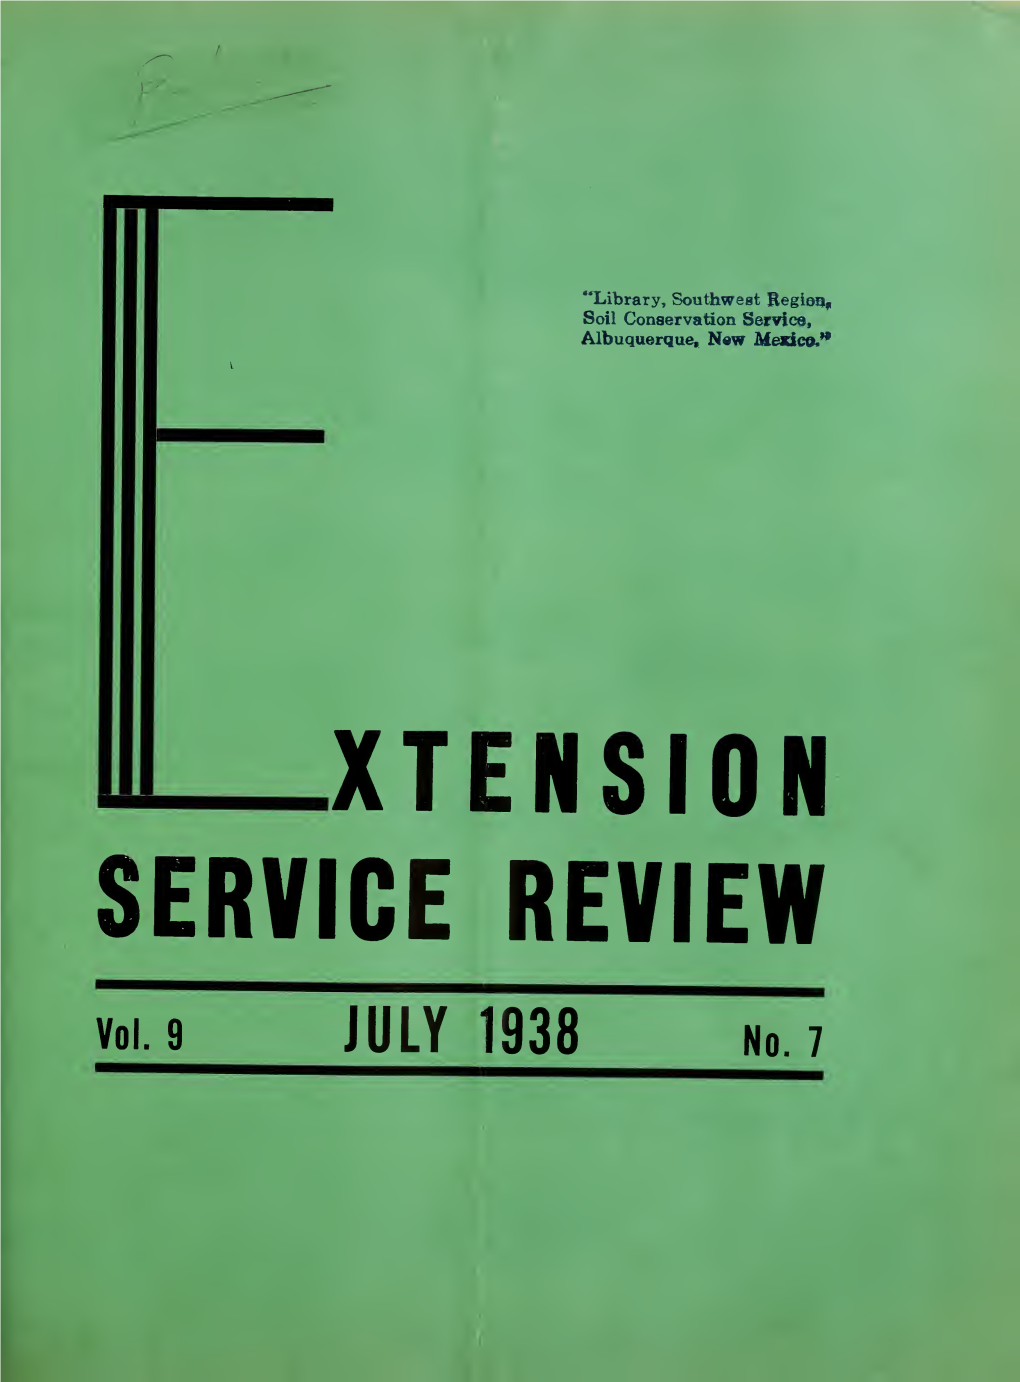 EXTENSION SERVICE REVIEW Published by Direction of the Secretary of World Youth Congress, Poughkeepsie, N